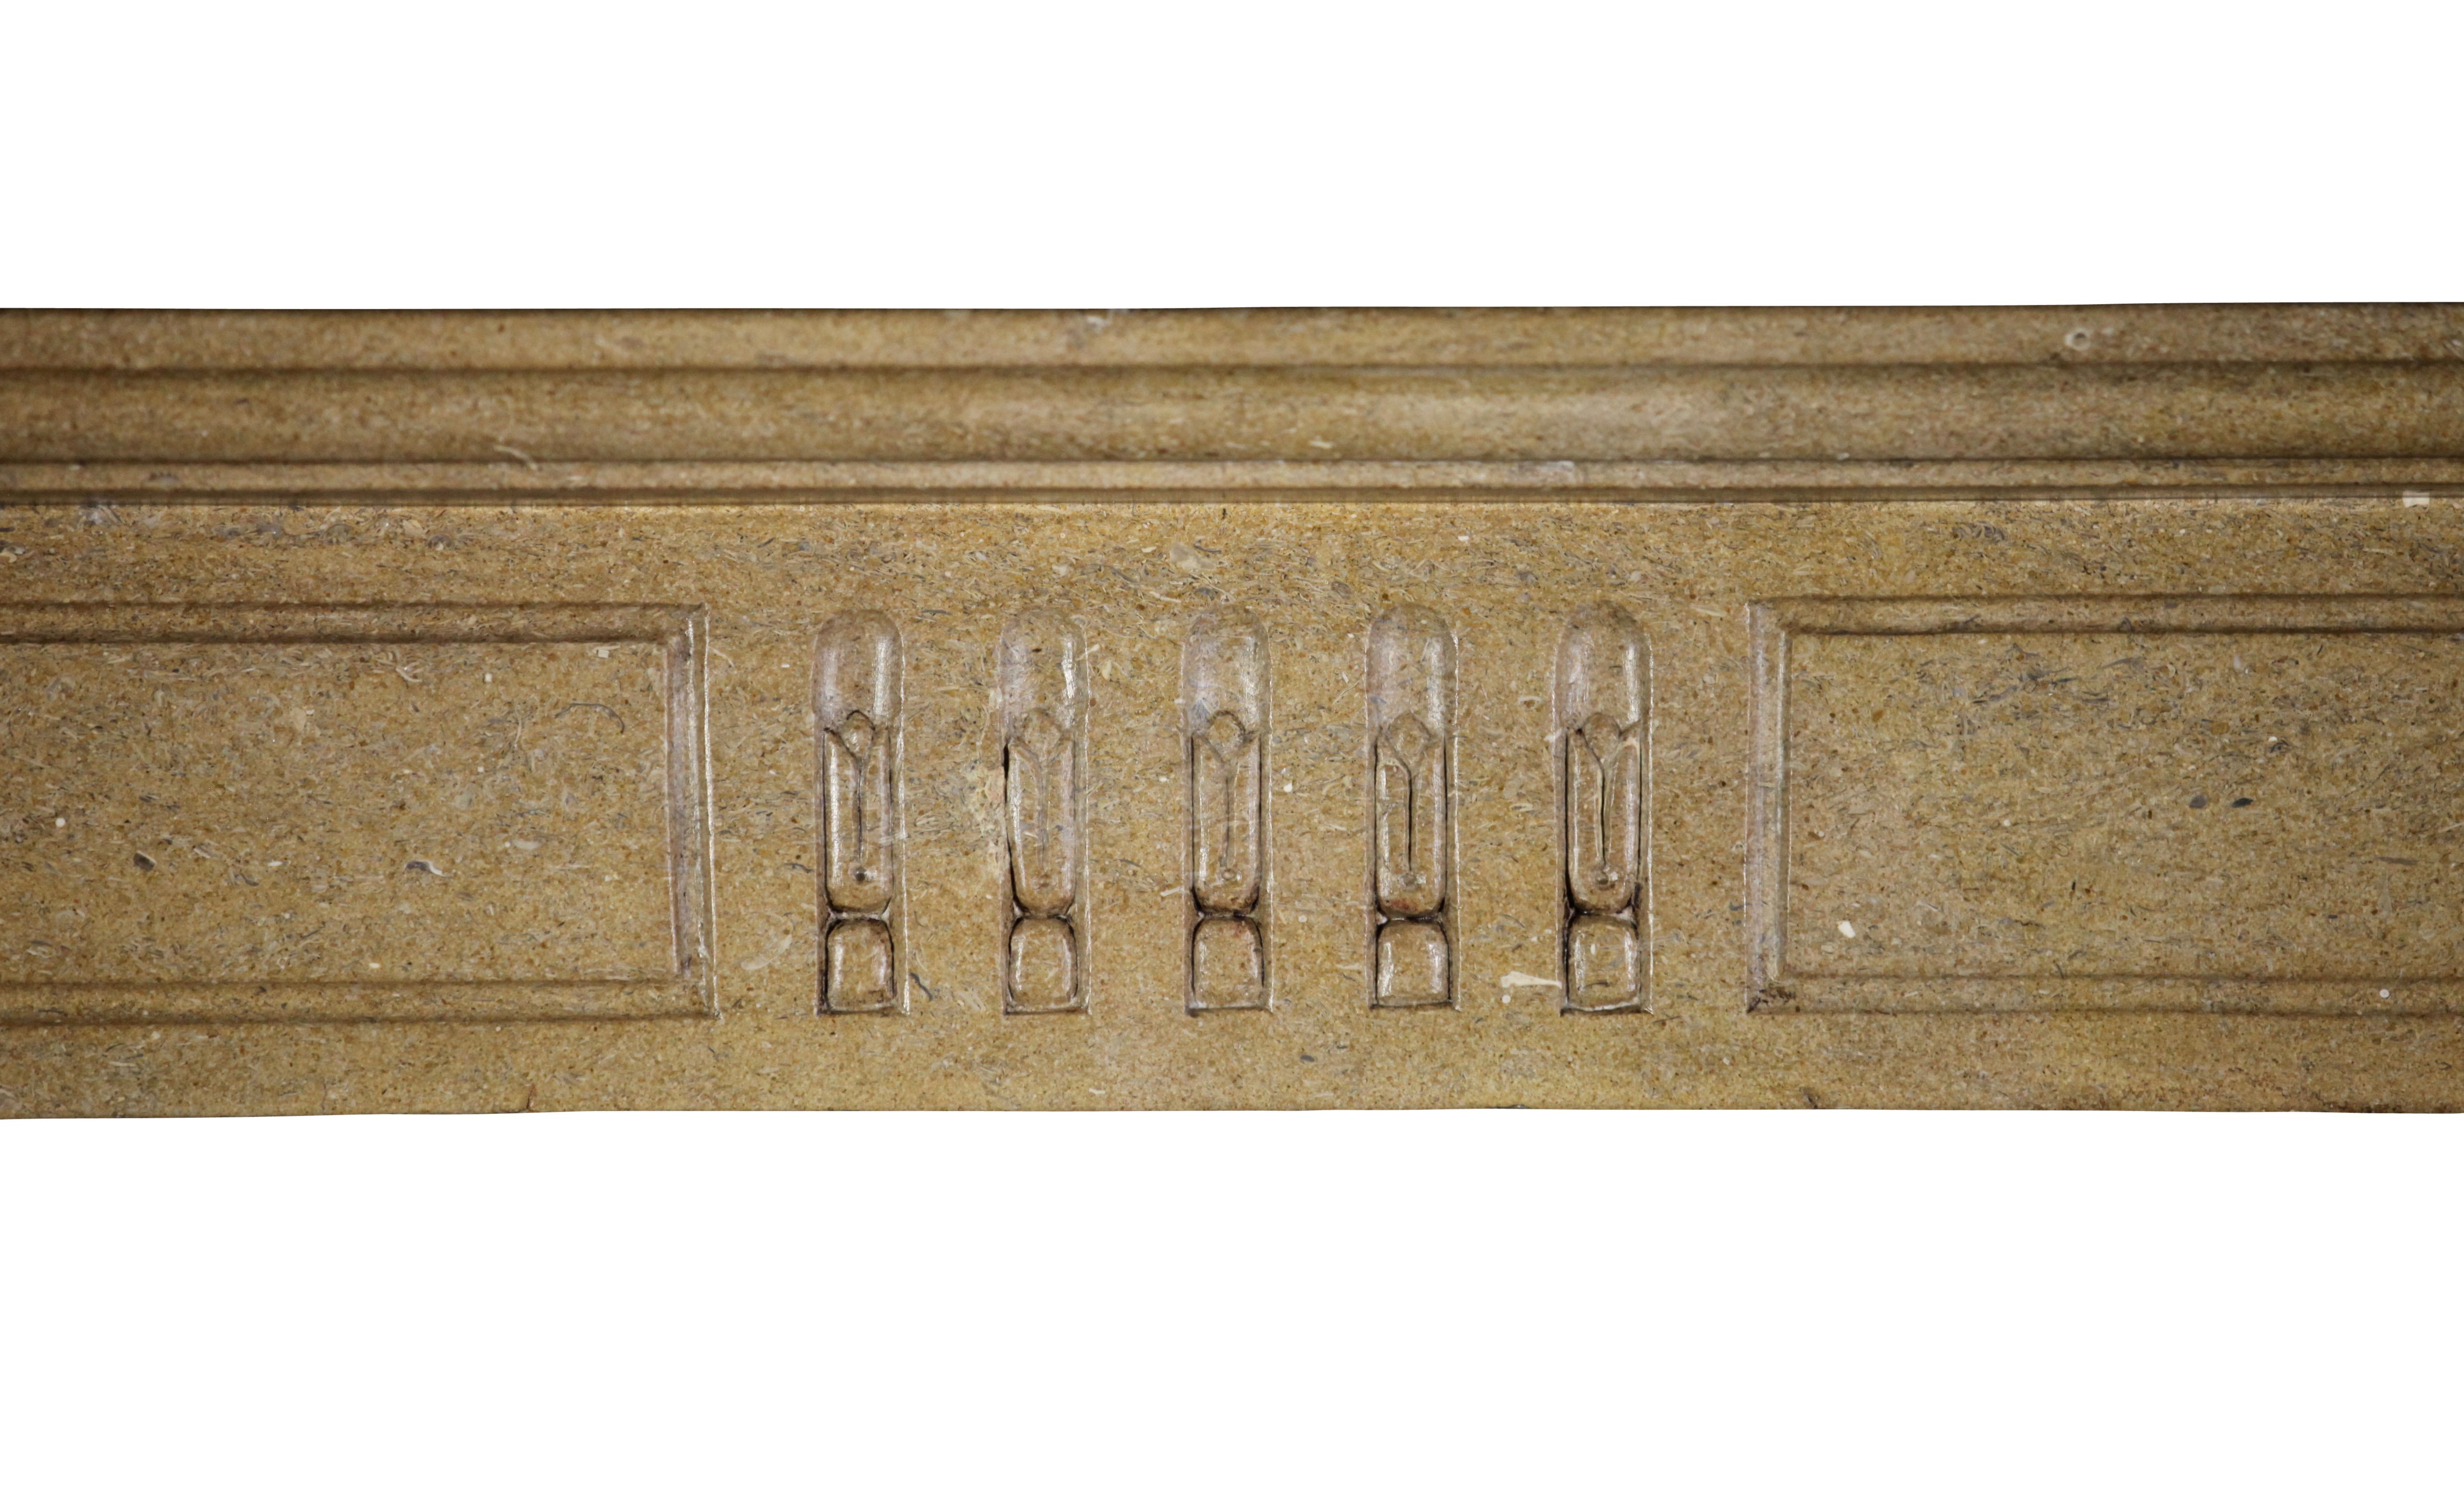 A fine 18th century French chimney piece. This is a fine Louis XVI period small bourguignon original antique fireplace surround from the Dijon region. It was installed in a paneled room in a Classic interior.
Measures:
130 cm exterior width 51.18